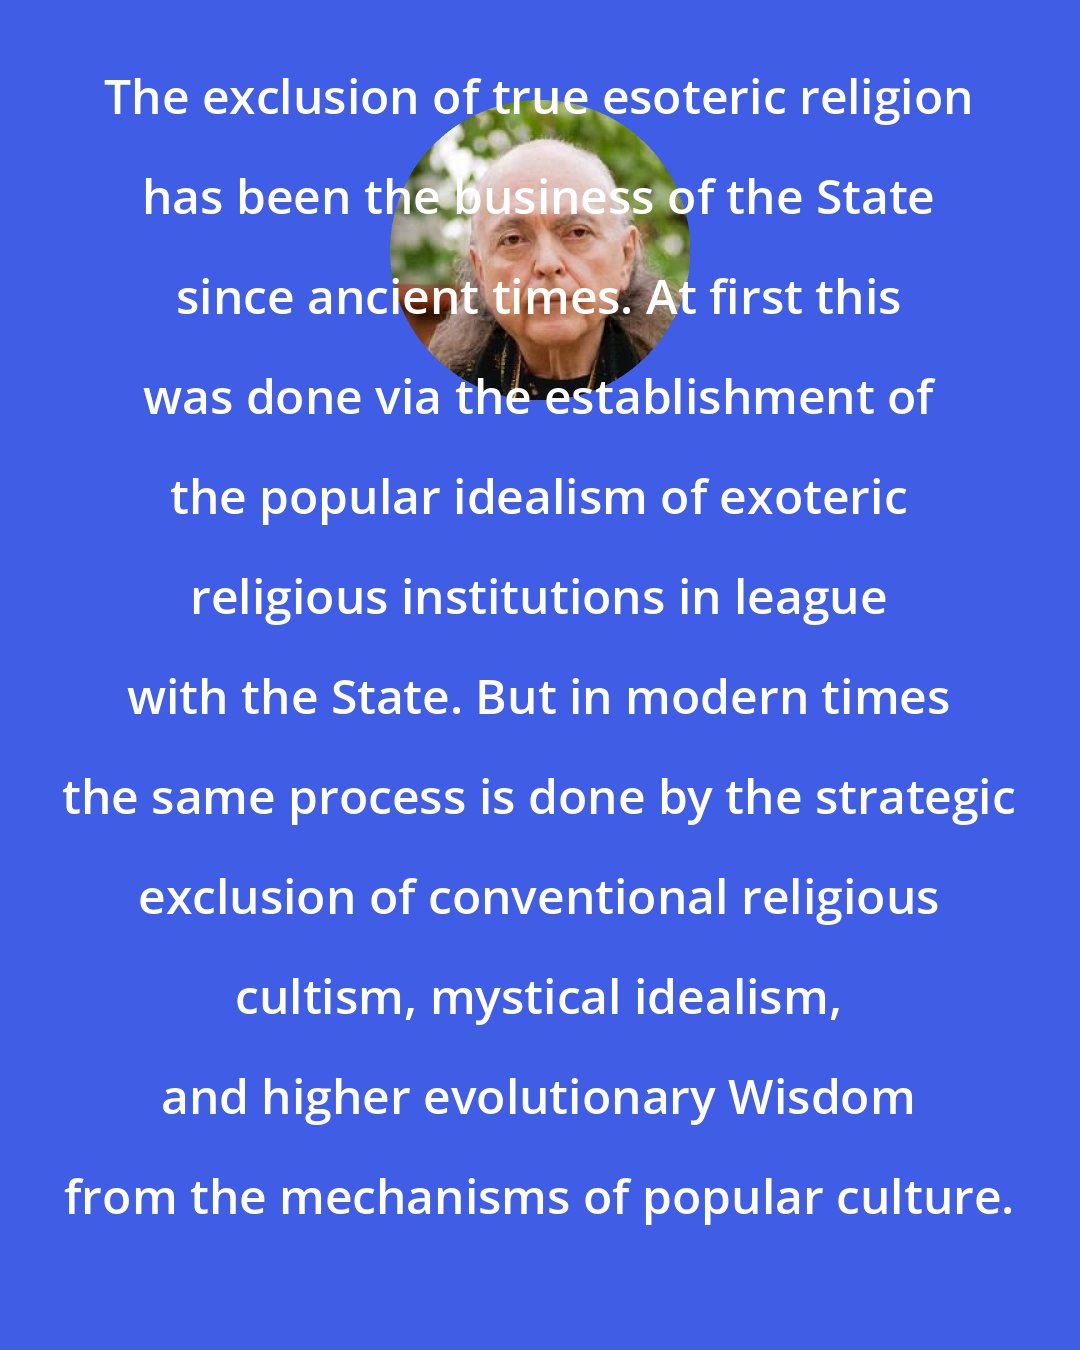 Adi Da: The exclusion of true esoteric religion has been the business of the State since ancient times. At first this was done via the establishment of the popular idealism of exoteric religious institutions in league with the State. But in modern times the same process is done by the strategic exclusion of conventional religious cultism, mystical idealism, and higher evolutionary Wisdom from the mechanisms of popular culture.